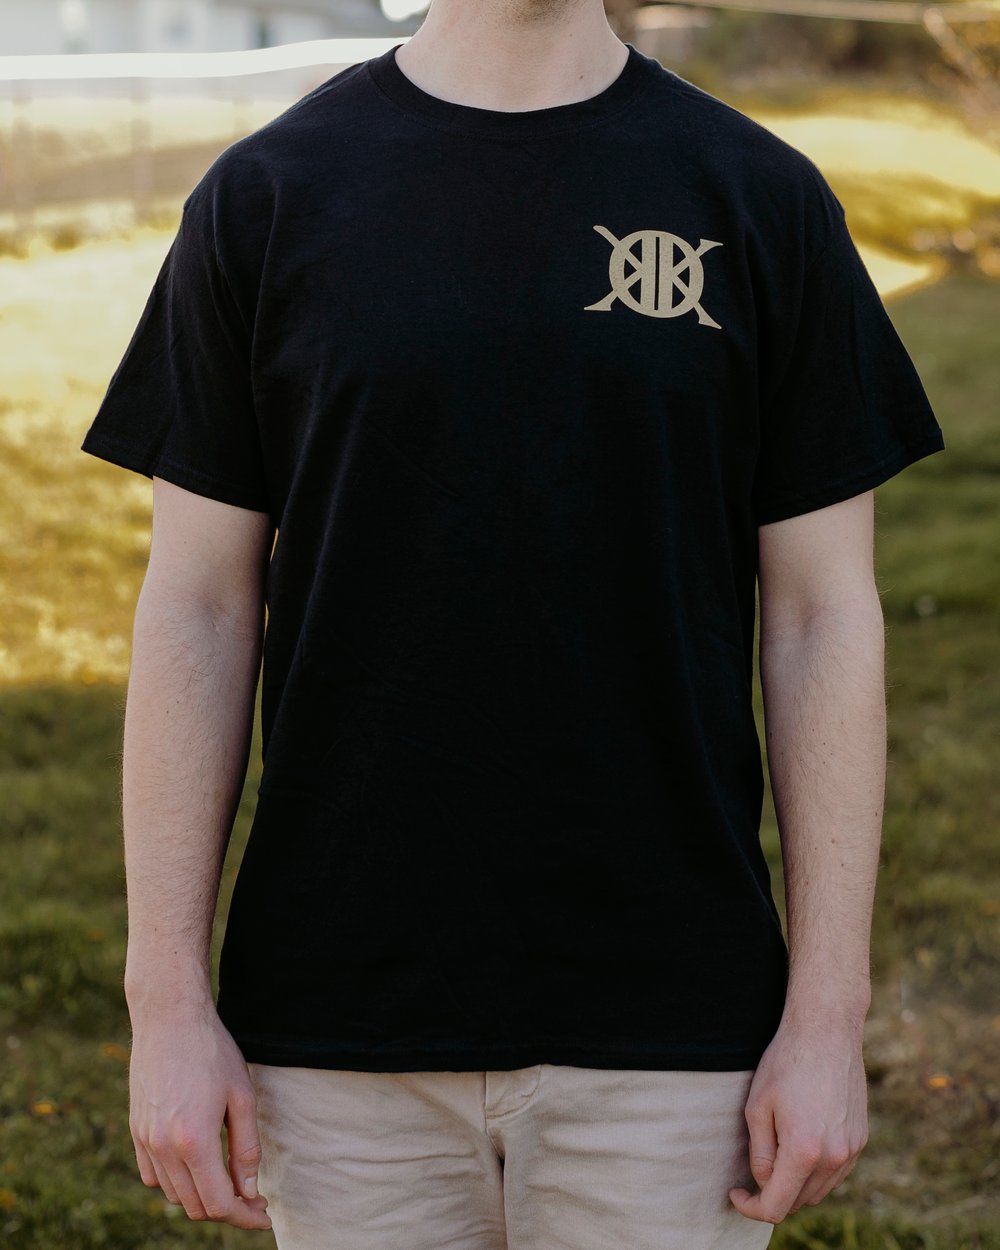 Black and Gold T-Shirt